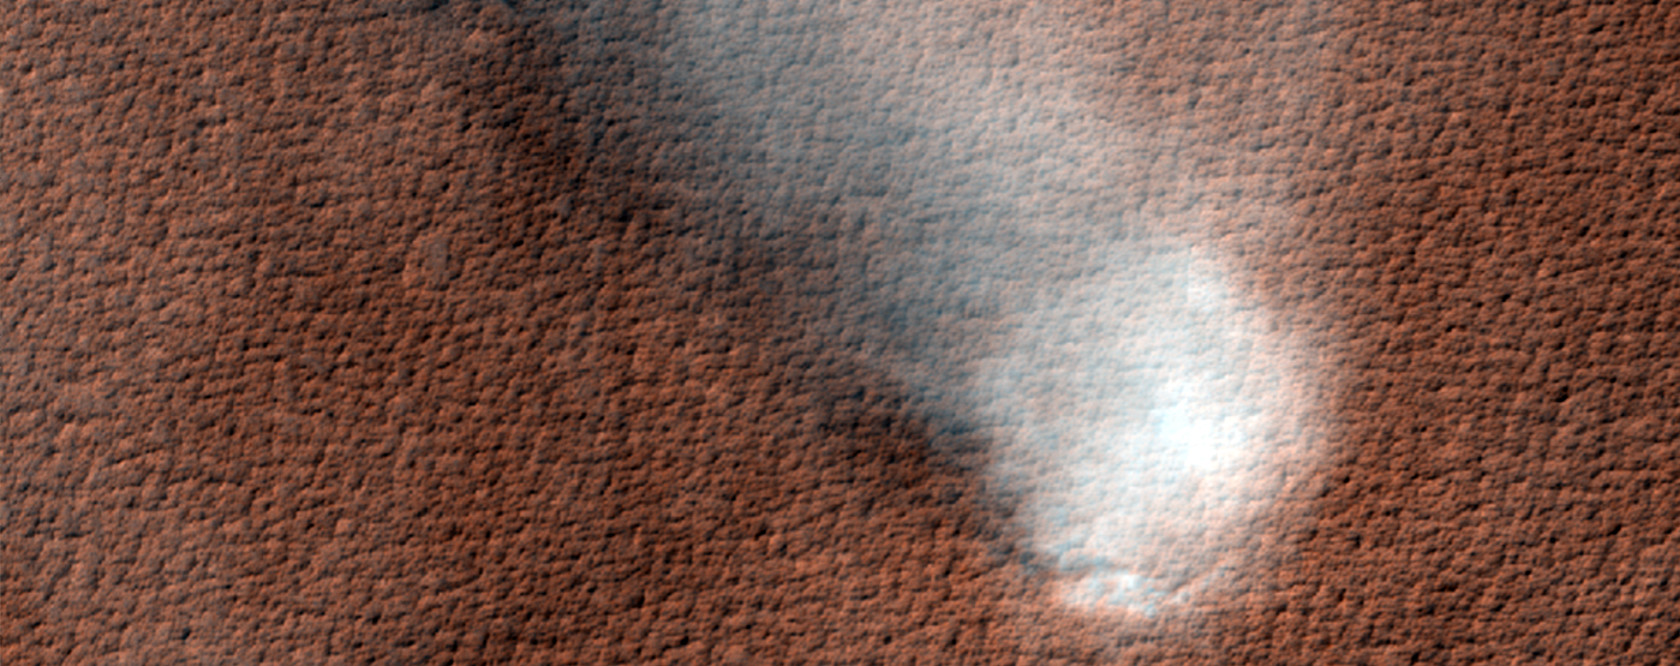 On the Look-out for Dust Devils